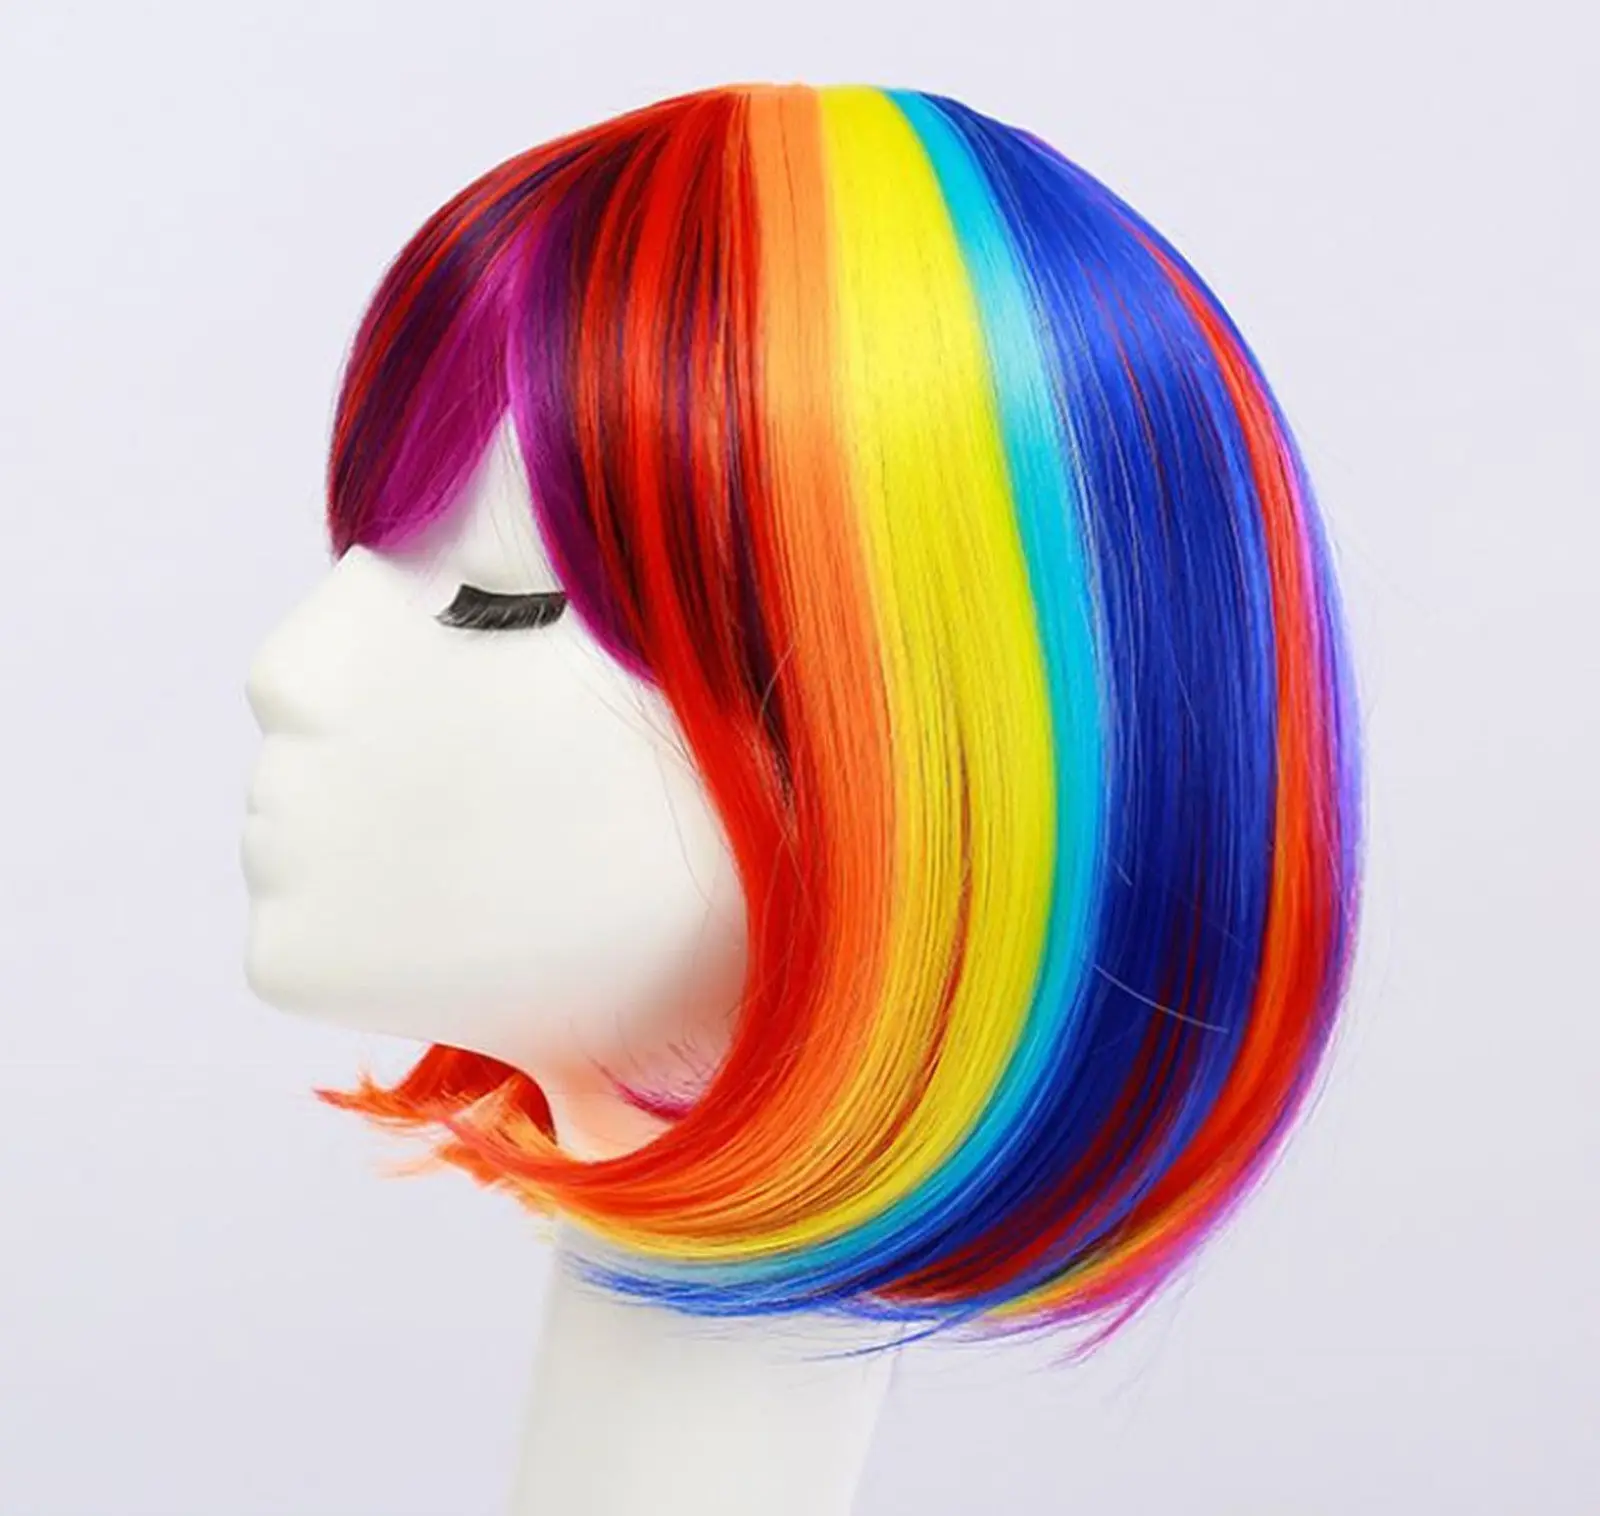 colorful wig costume